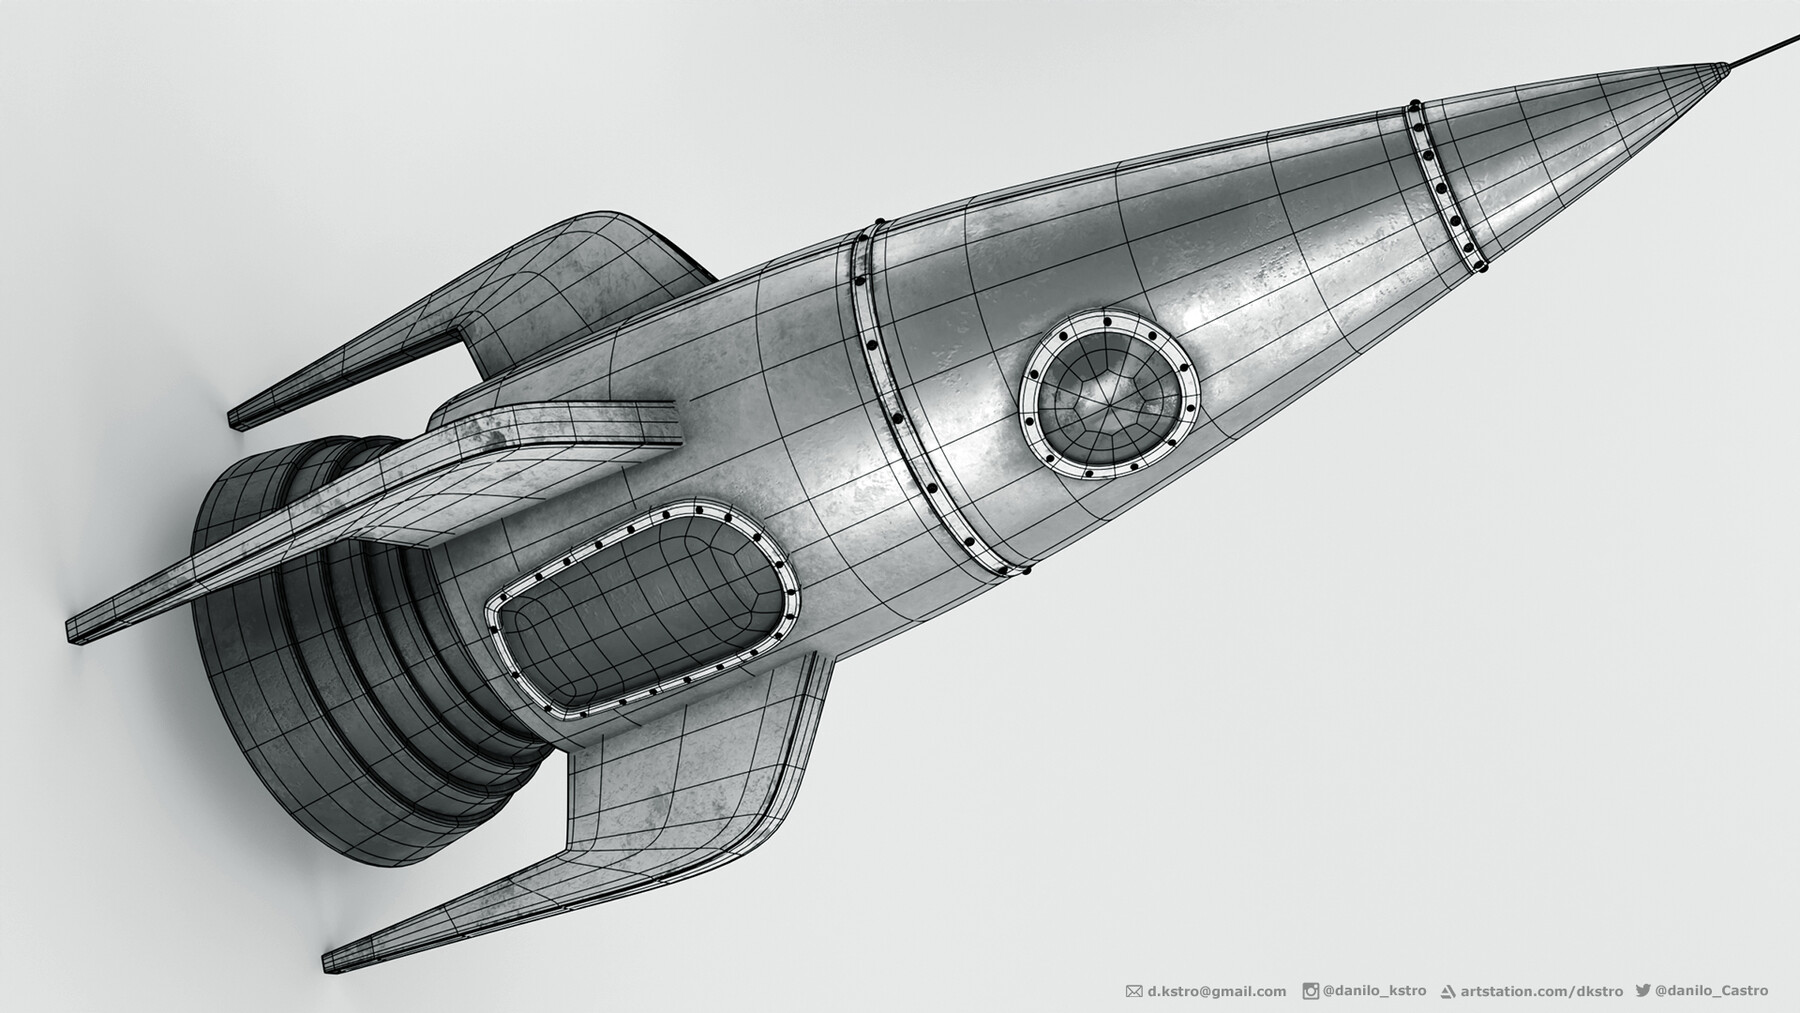 Rocket Ship Drawing - How To Draw A Rocket Ship Step By Step